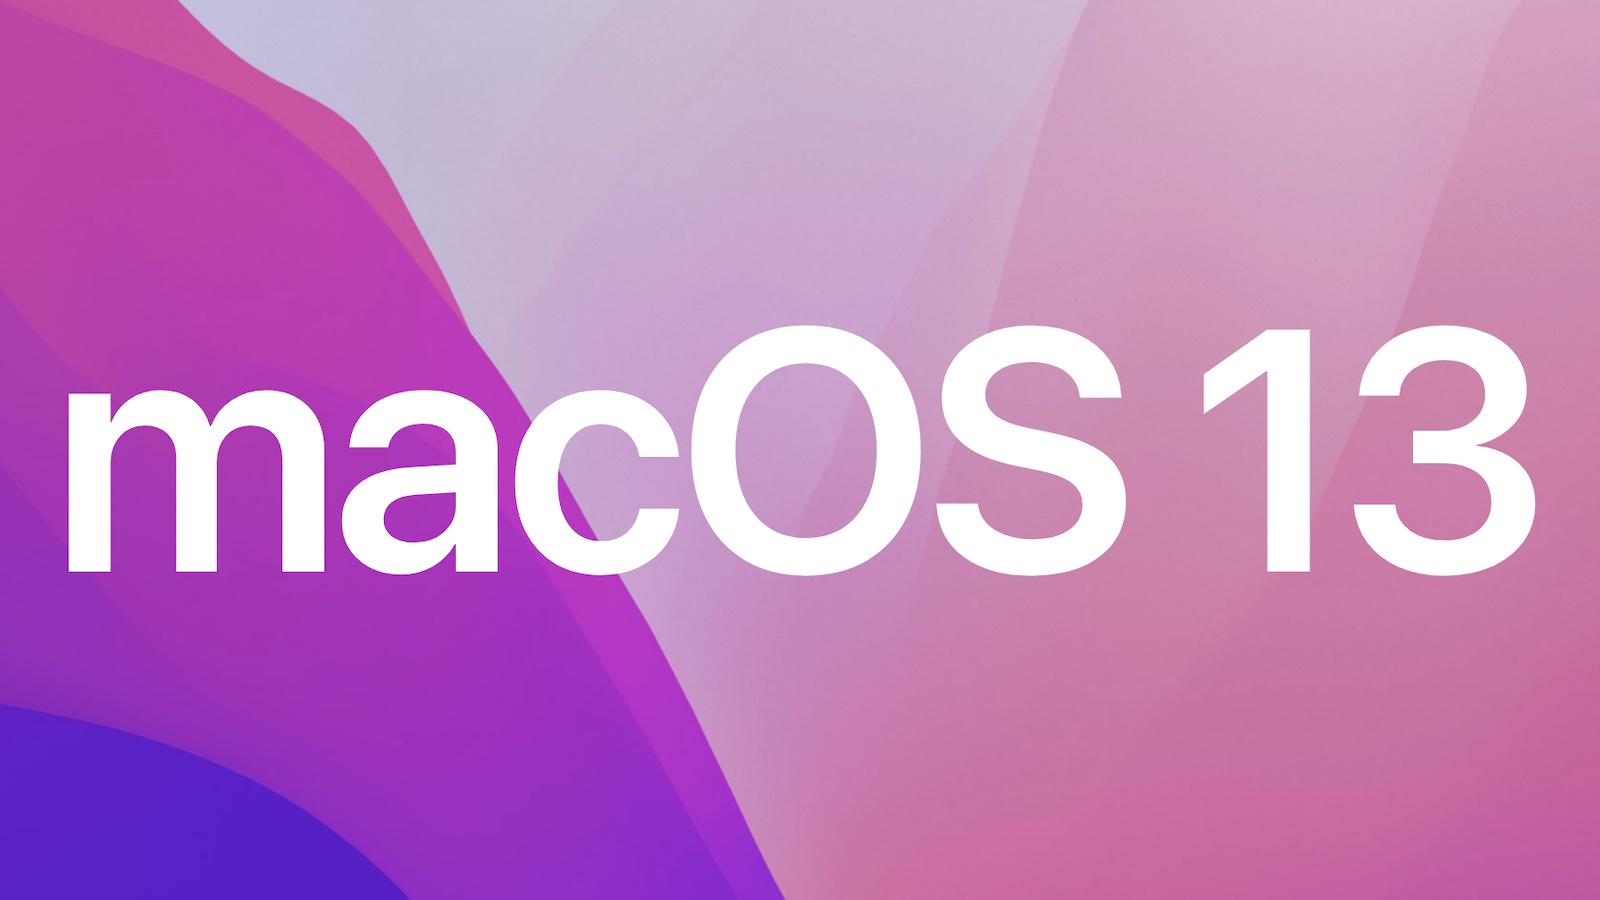 macOS 13: What We Know So Far